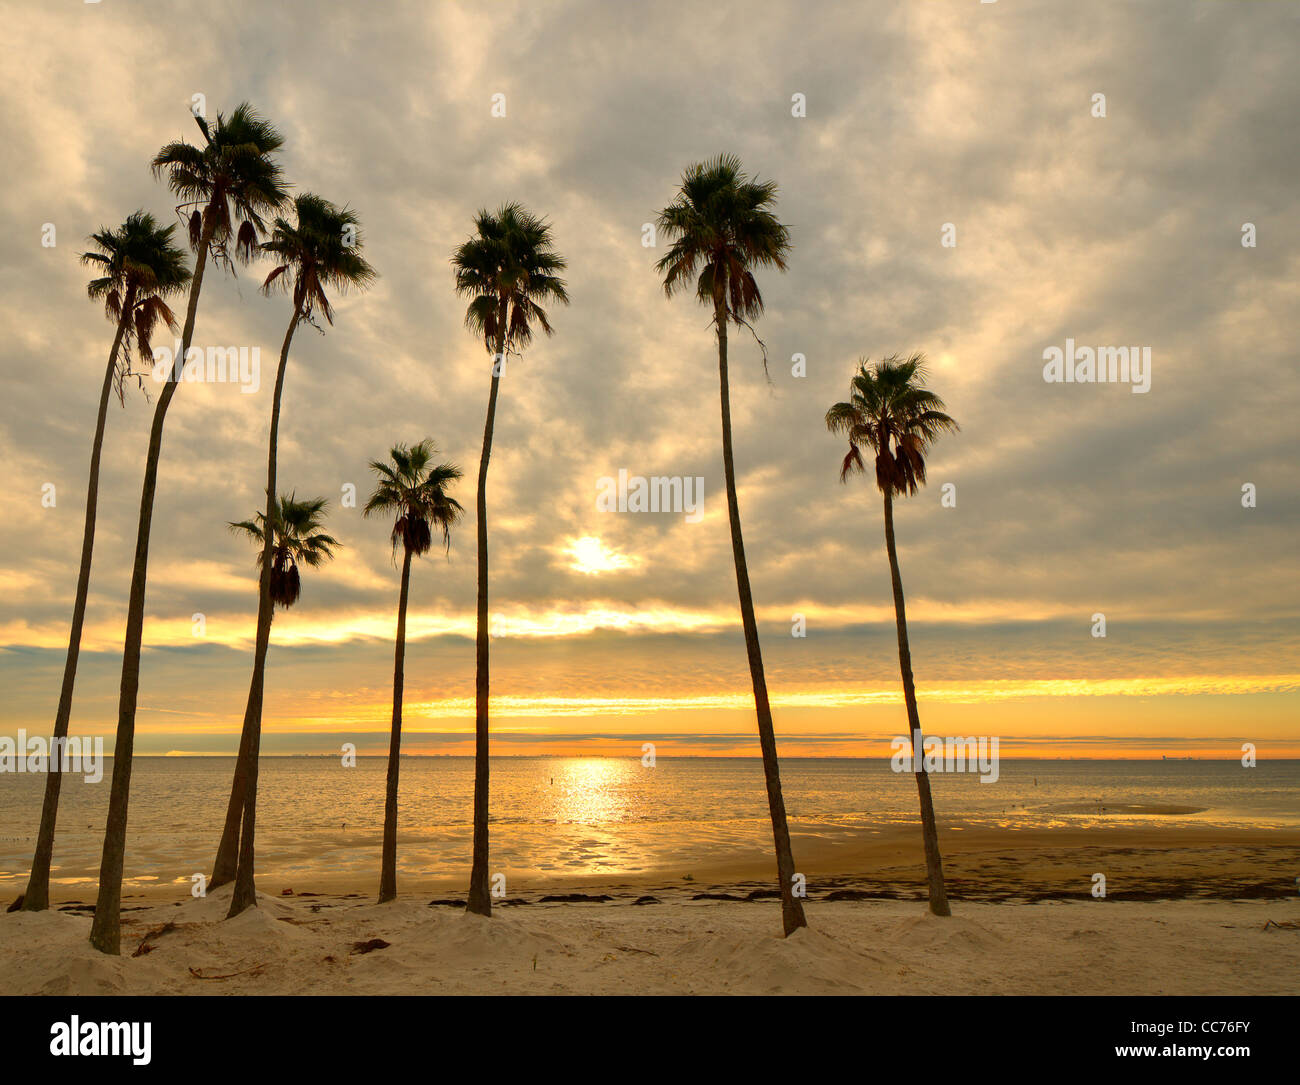 Palm trees on a beach with golden sunlight on Tampa Bay in St. Petersburg, Florida. Stock Photo